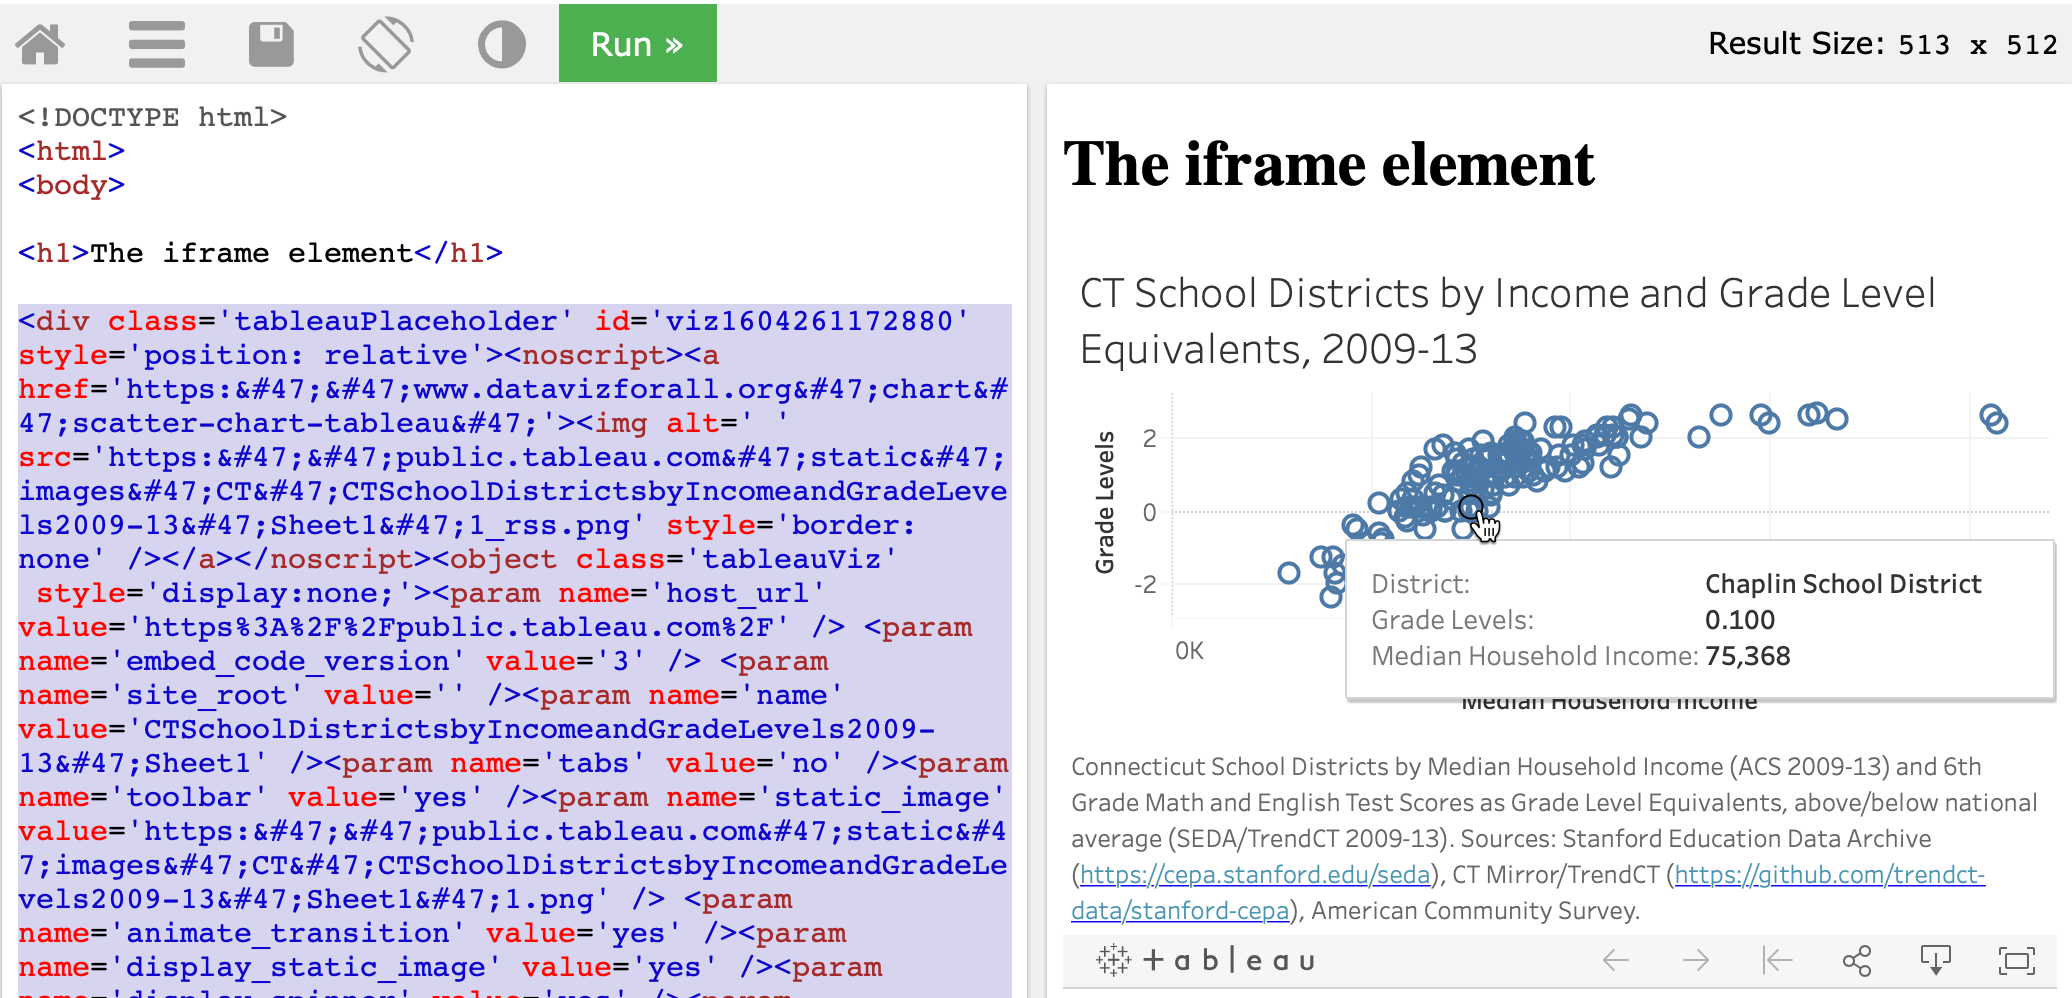 Paste your Tableau public embed code in place of the current iframe tag in the TryIt page and click Run.